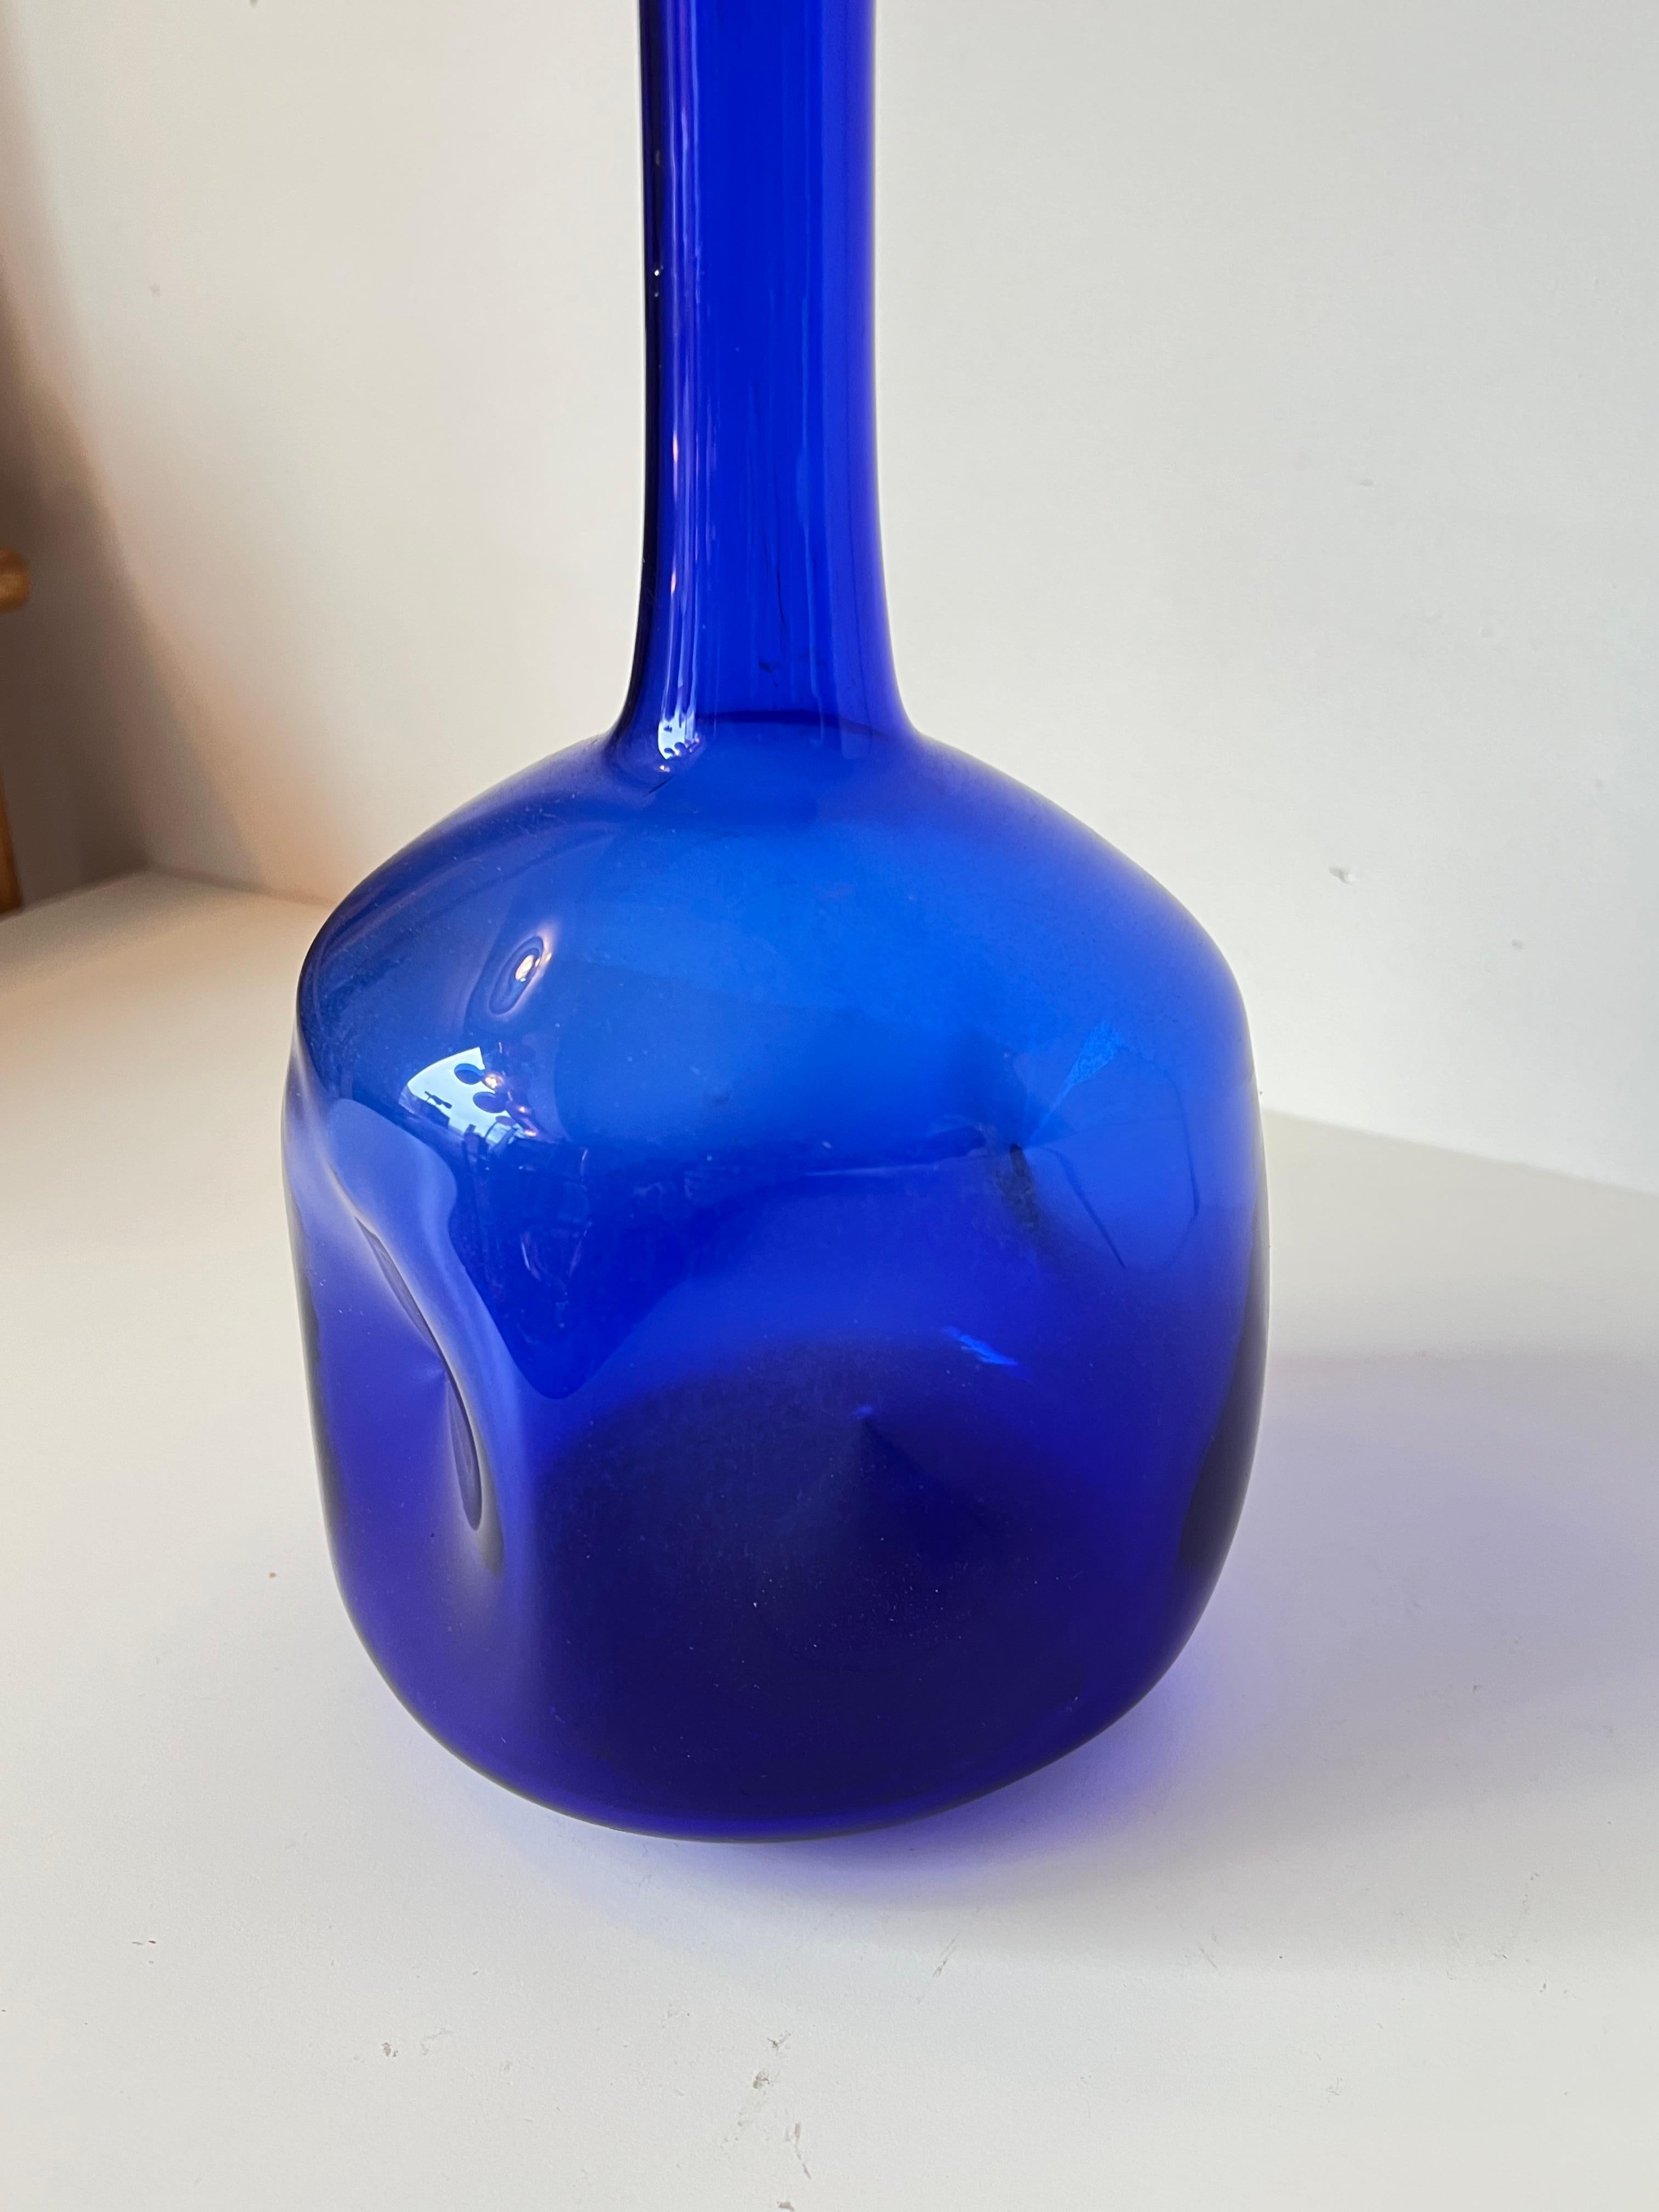 Vintage deep blue glass decanter with stopper, called ‘genie bottle’ - from Empoli, Italy, Mid-Century. Large format! In a fantastic eye-catching blue colour with a teardrop stopper. Very good condition. The point of the stopper has a fabrication